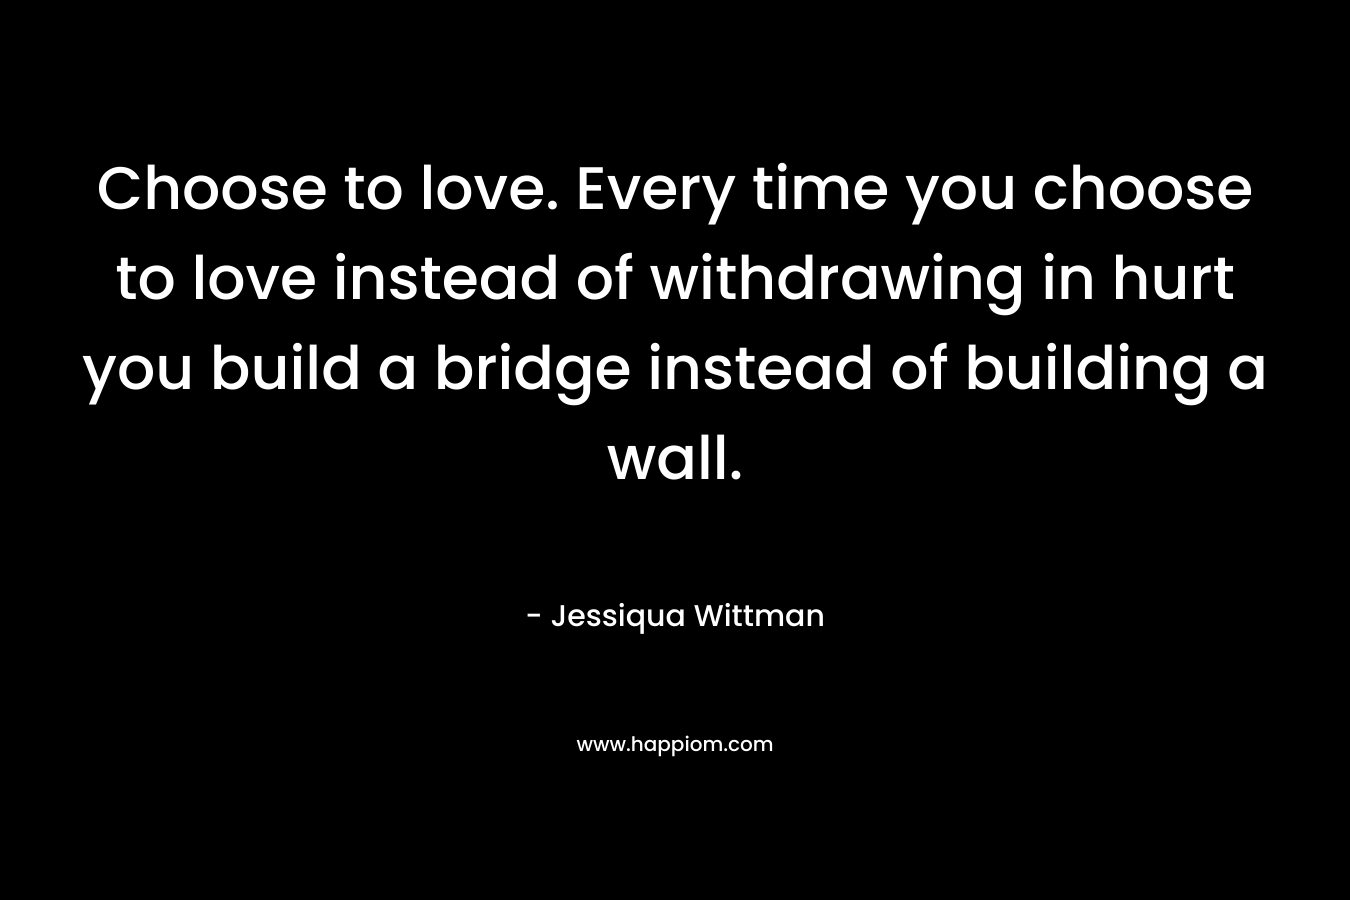 Choose to love. Every time you choose to love instead of withdrawing in hurt you build a bridge instead of building a wall. – Jessiqua Wittman